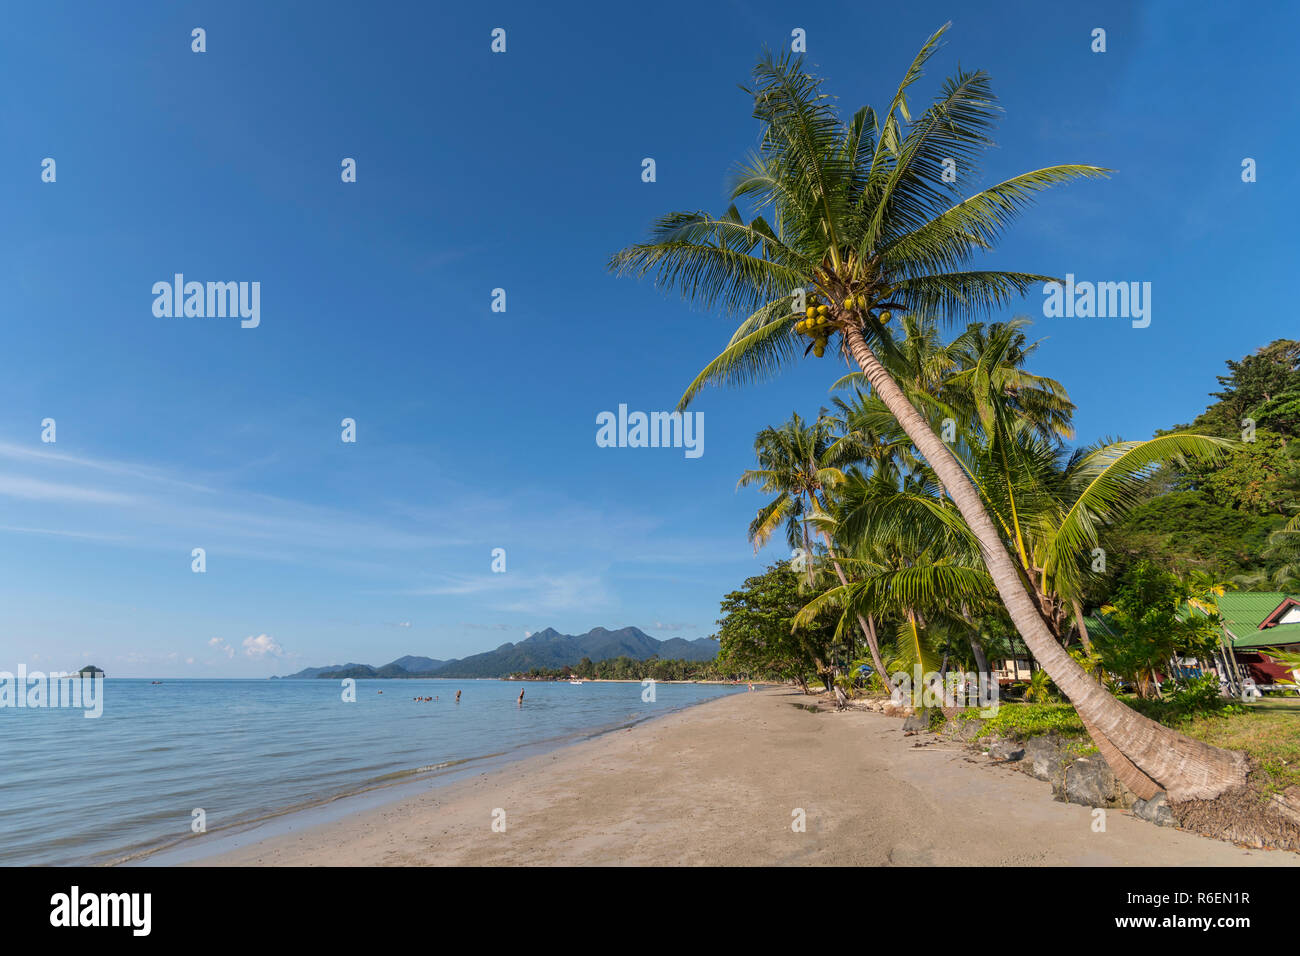 Beachside With Coconut Tree, Koh Chang, Thailand Stock Photo